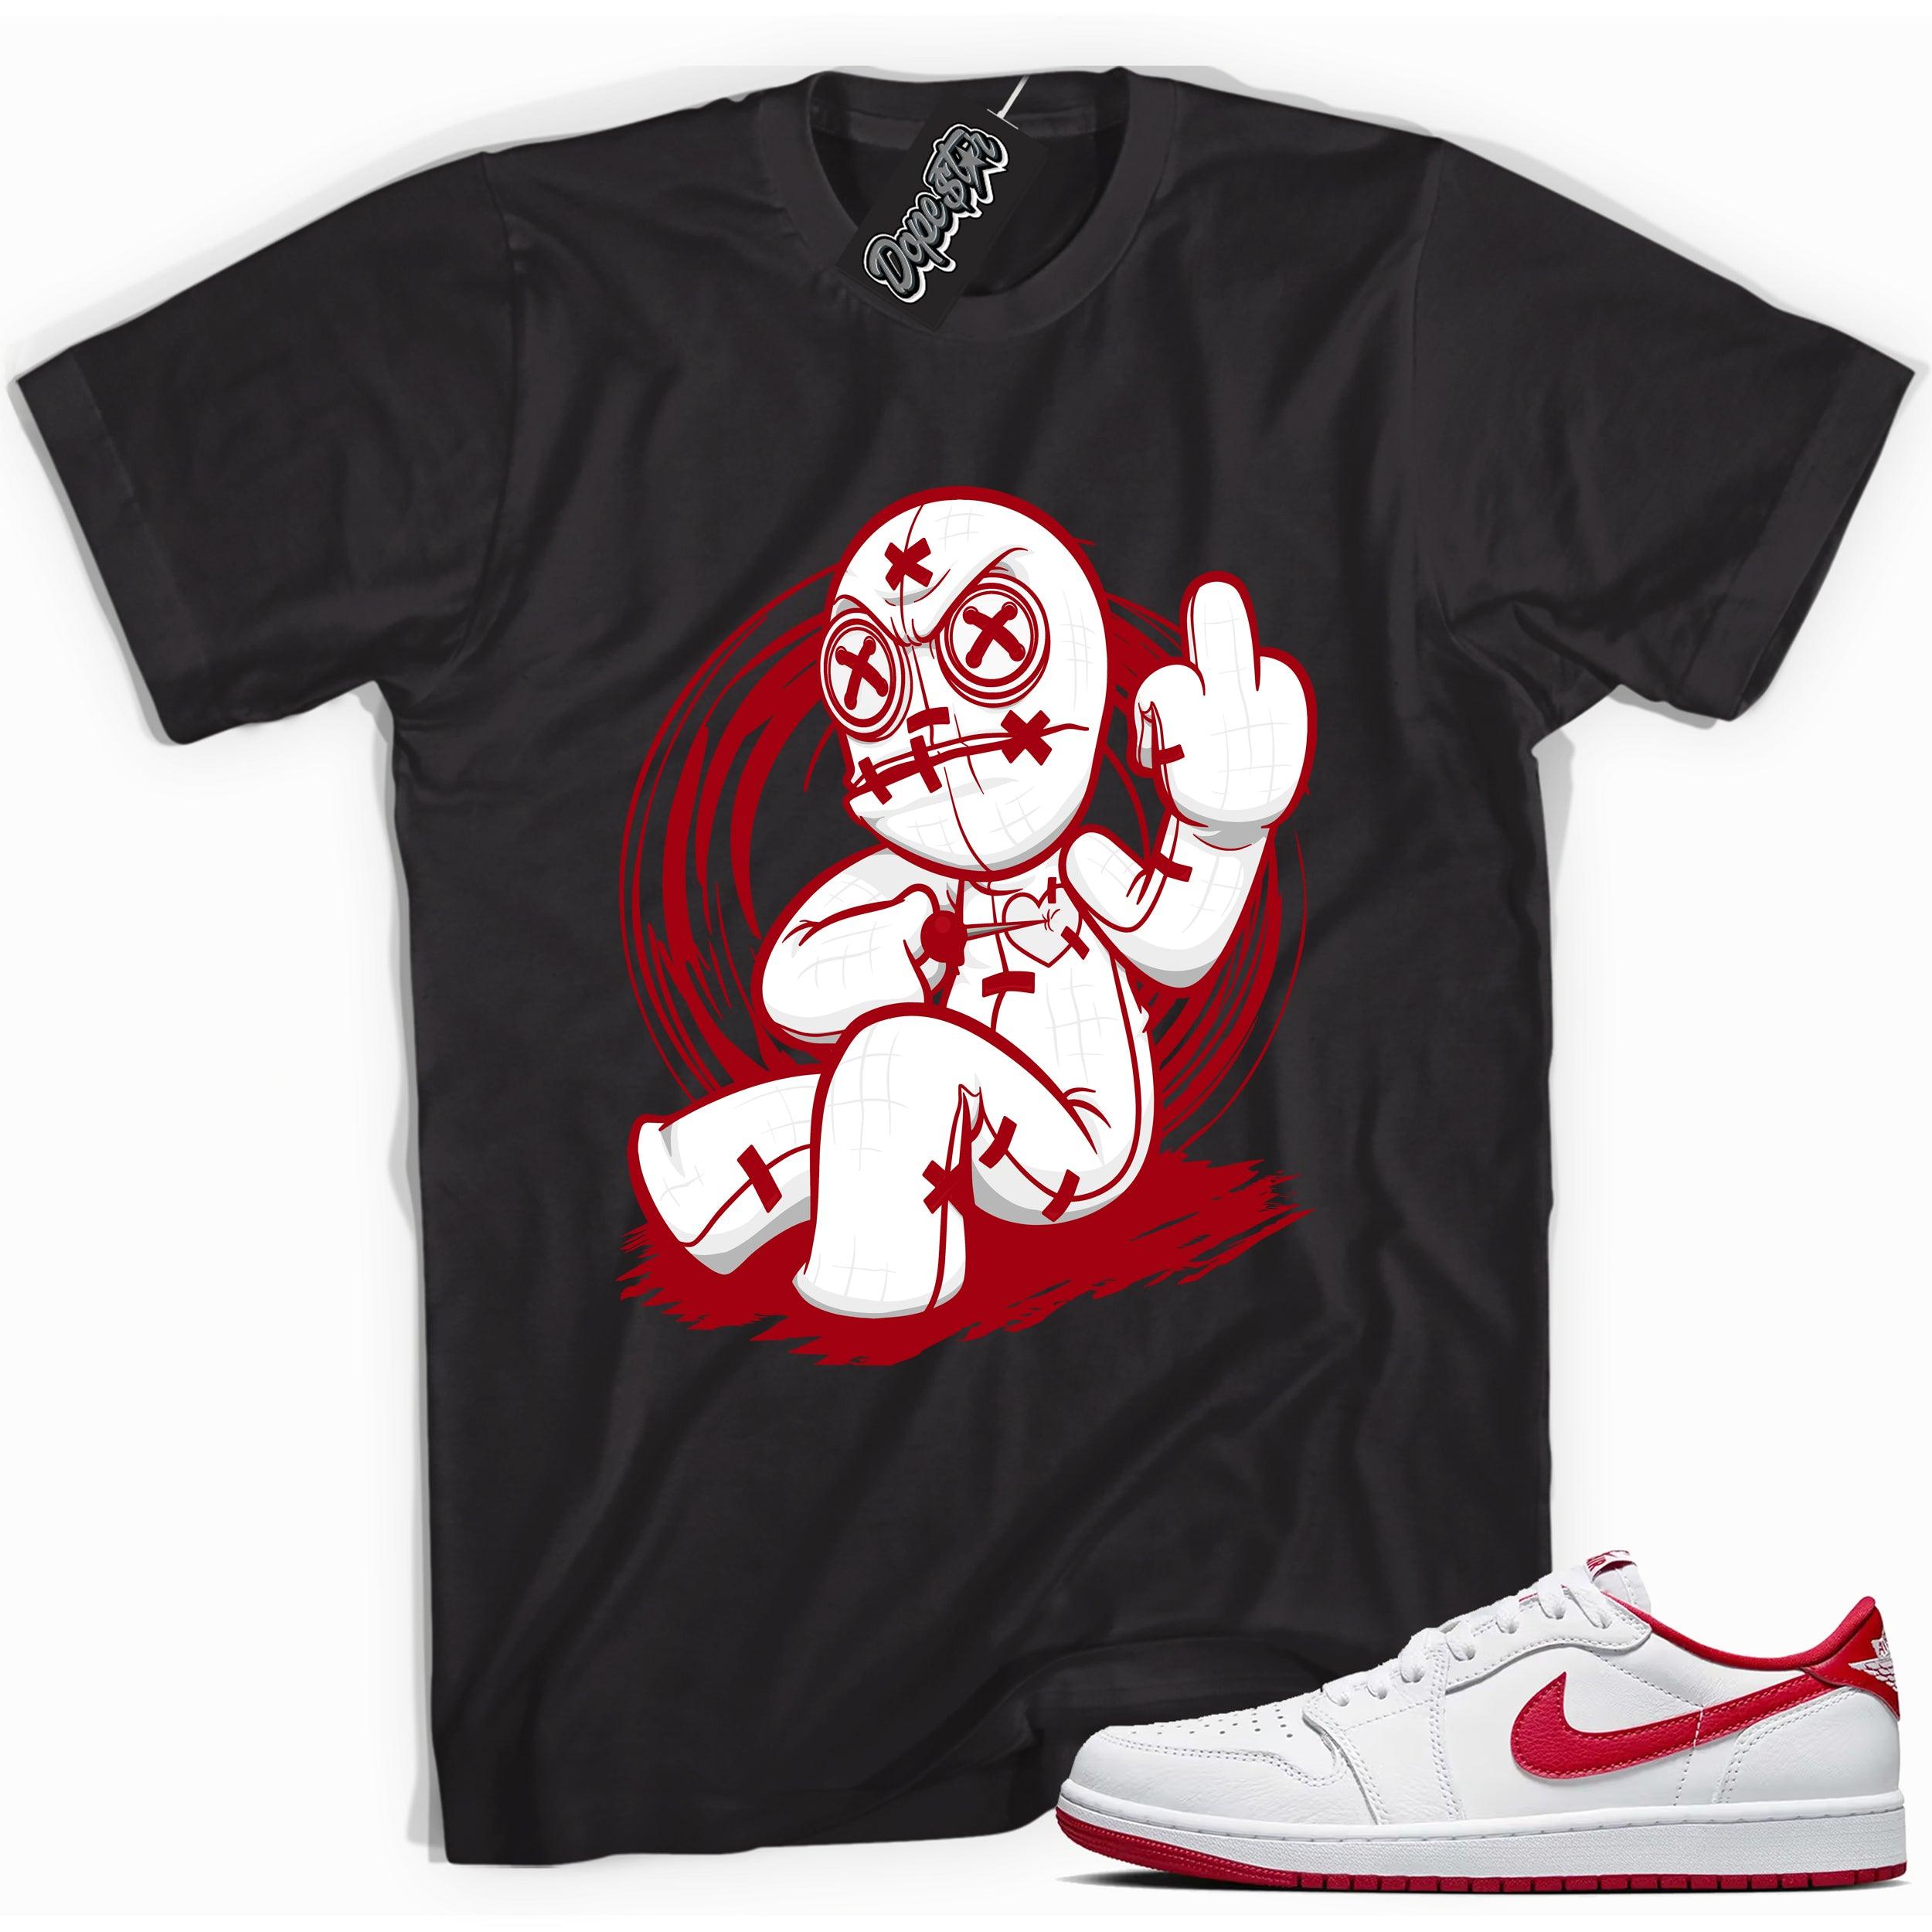 Cool Black graphic tee with “ VooDoo Doll ” print, that perfectly matches Air Jordan 1 Retro Low OG University Red and white sneakers 